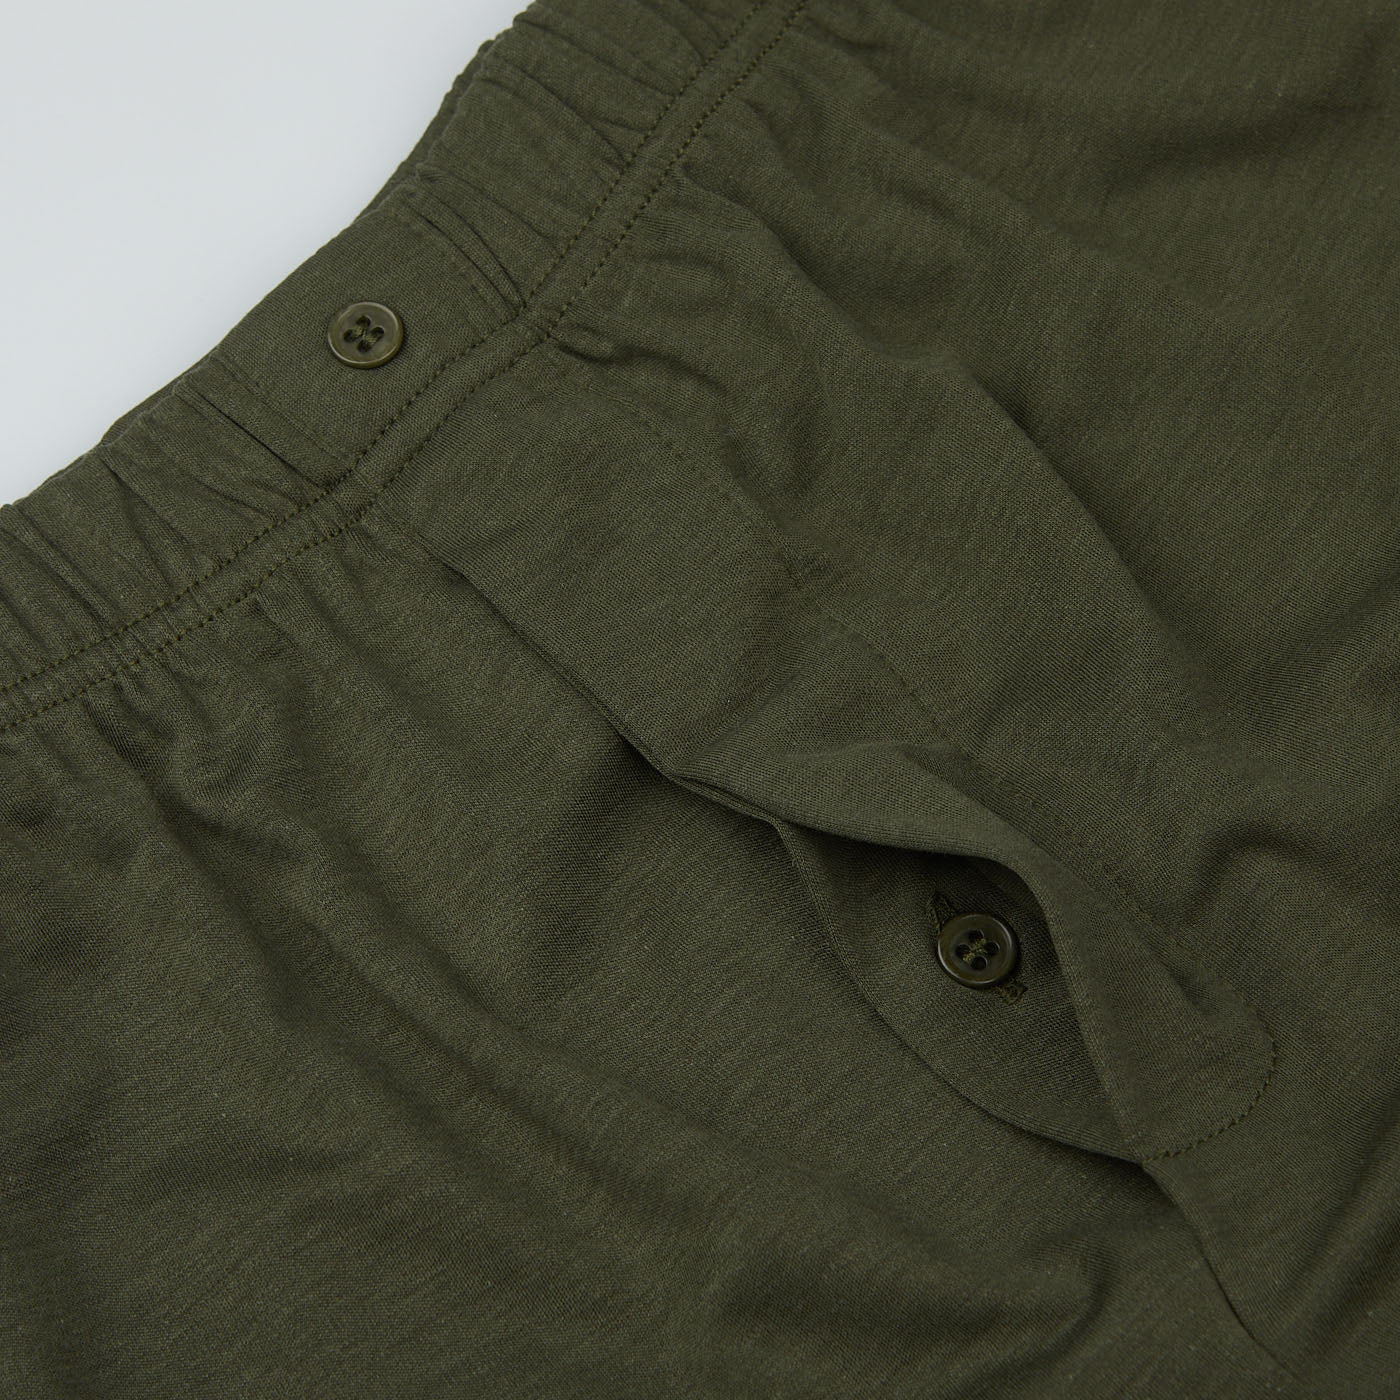 Close-up of the waistband and button-fly area of a pair of Olive Lyocell Cotton Henner Boxers from The White Briefs collection.